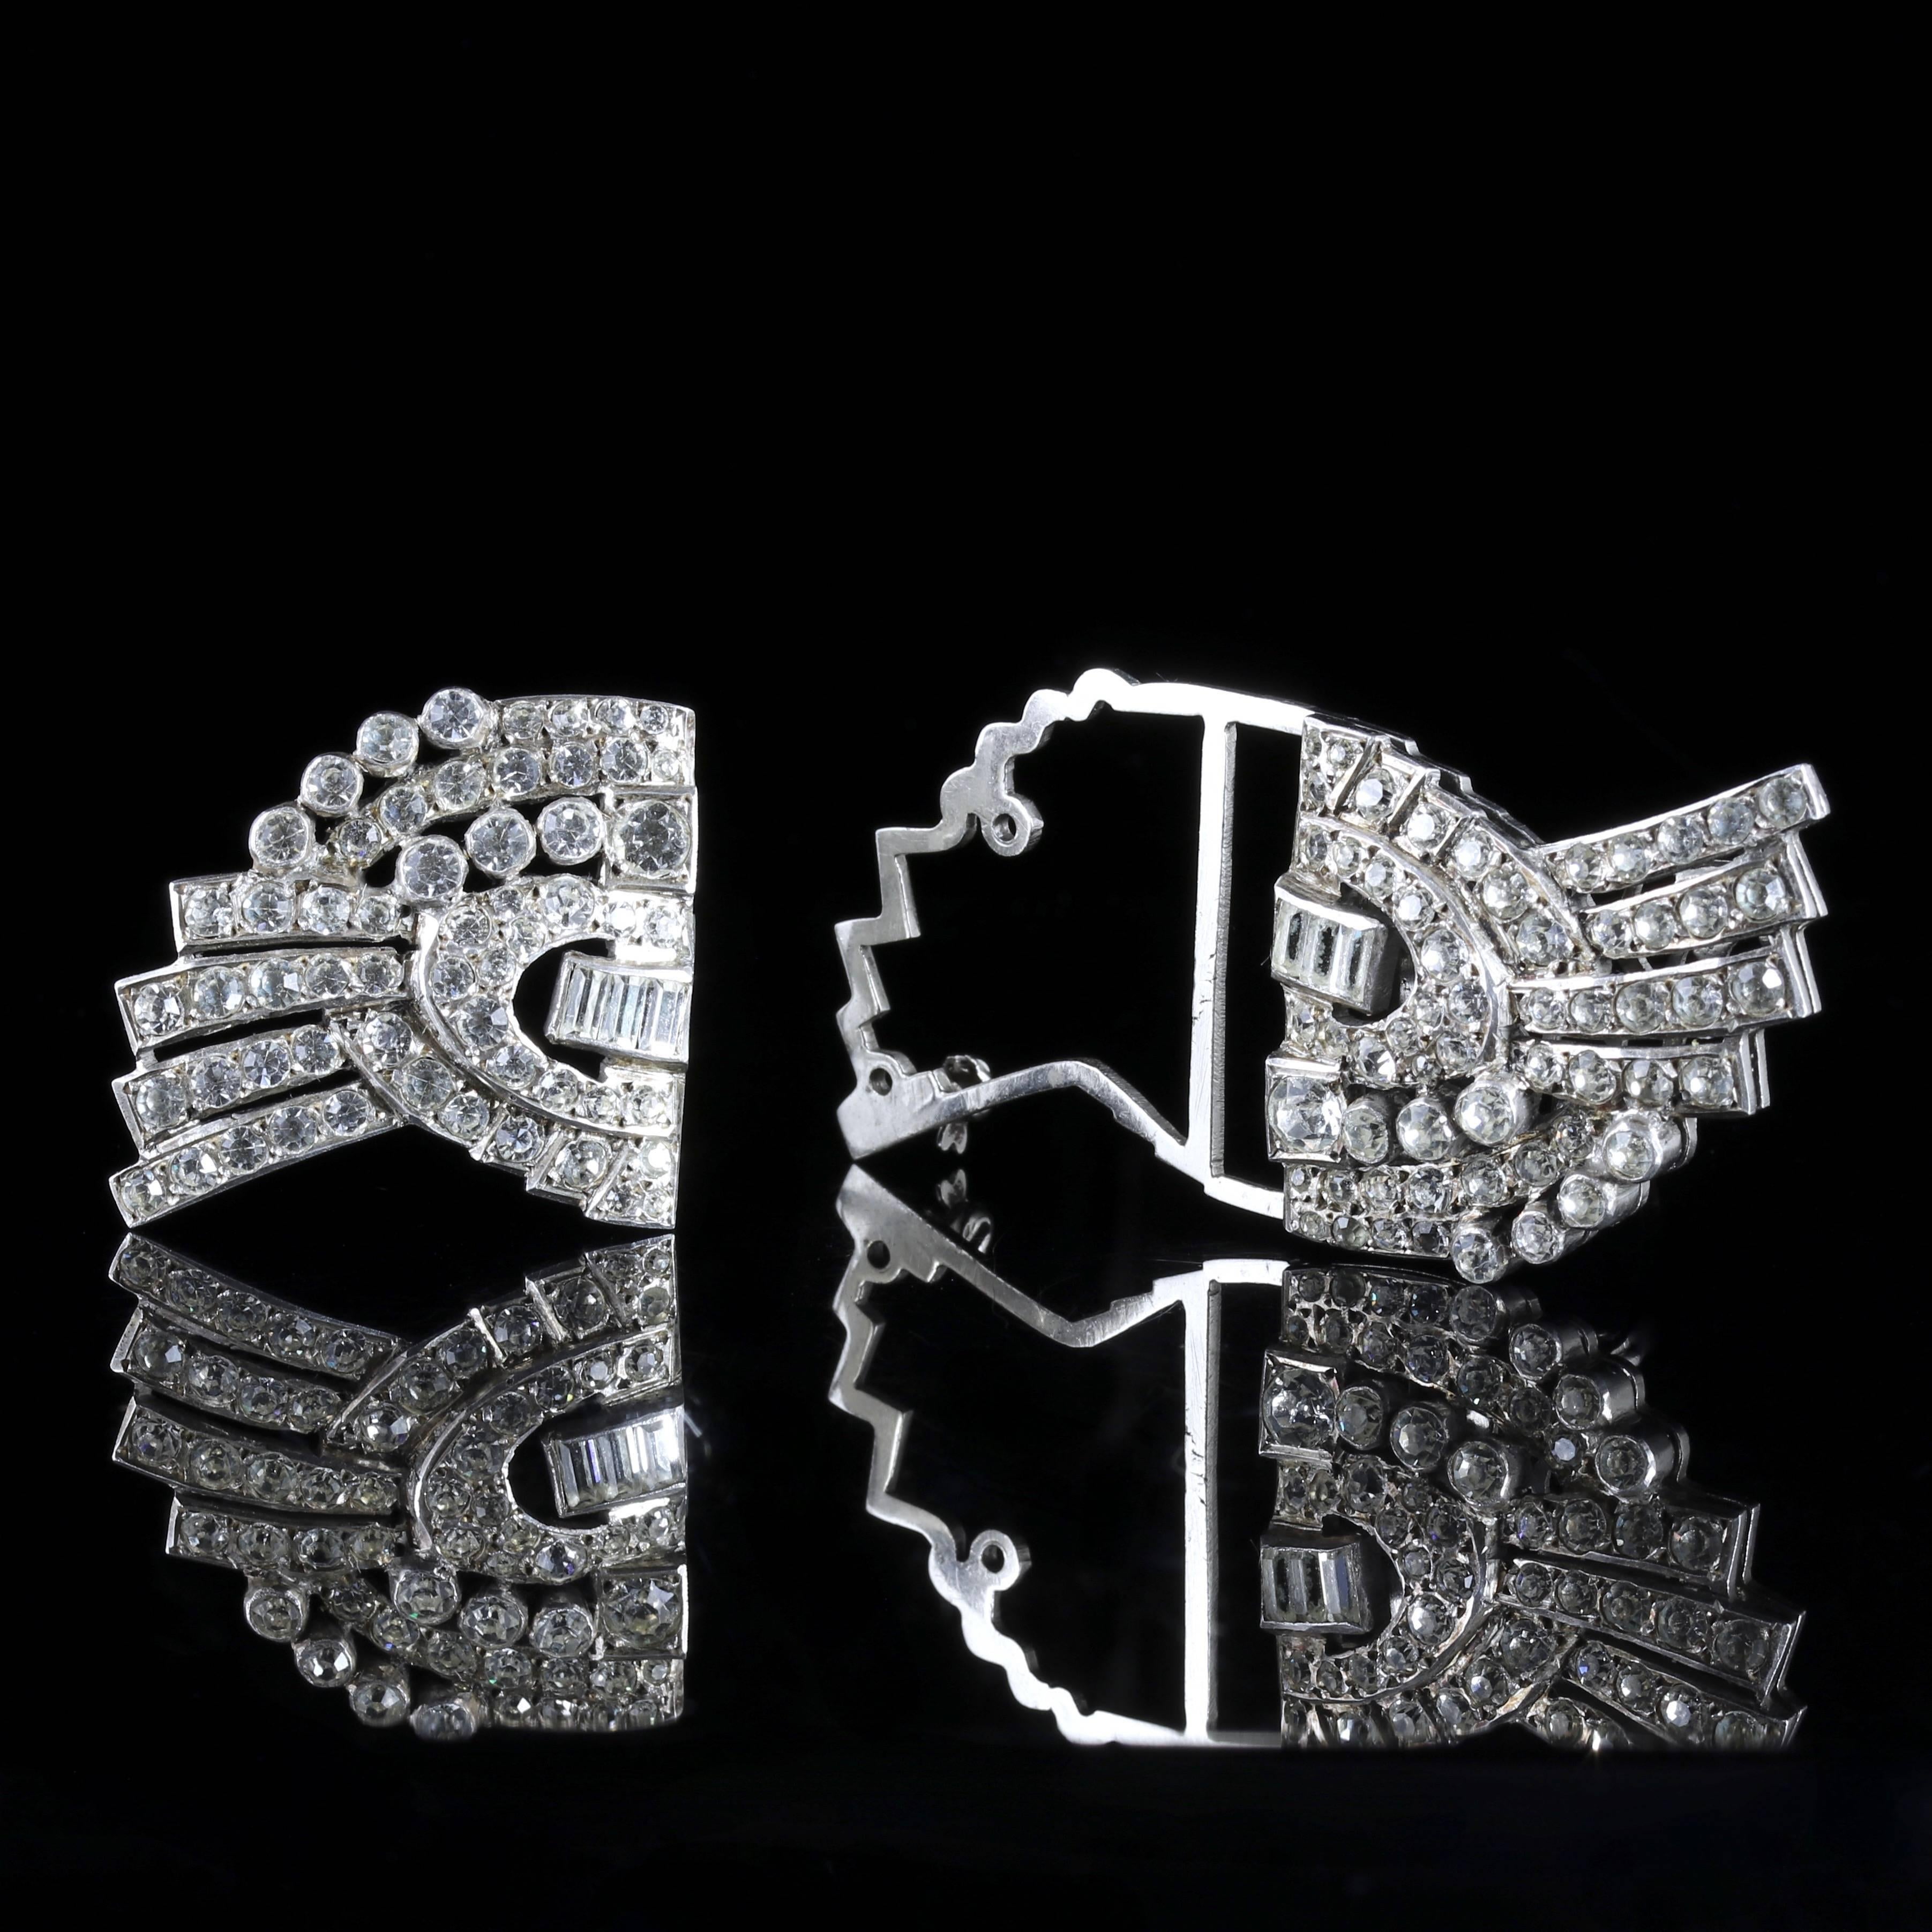 This beautiful large antique Sterling Silver Art Deco double clip brooch is genuine 1920. 

This unique Brooch has two detachable clips that will look fabulous on a lapel.

Each clip is adorned with beautiful white Paste Stones with baguette cut